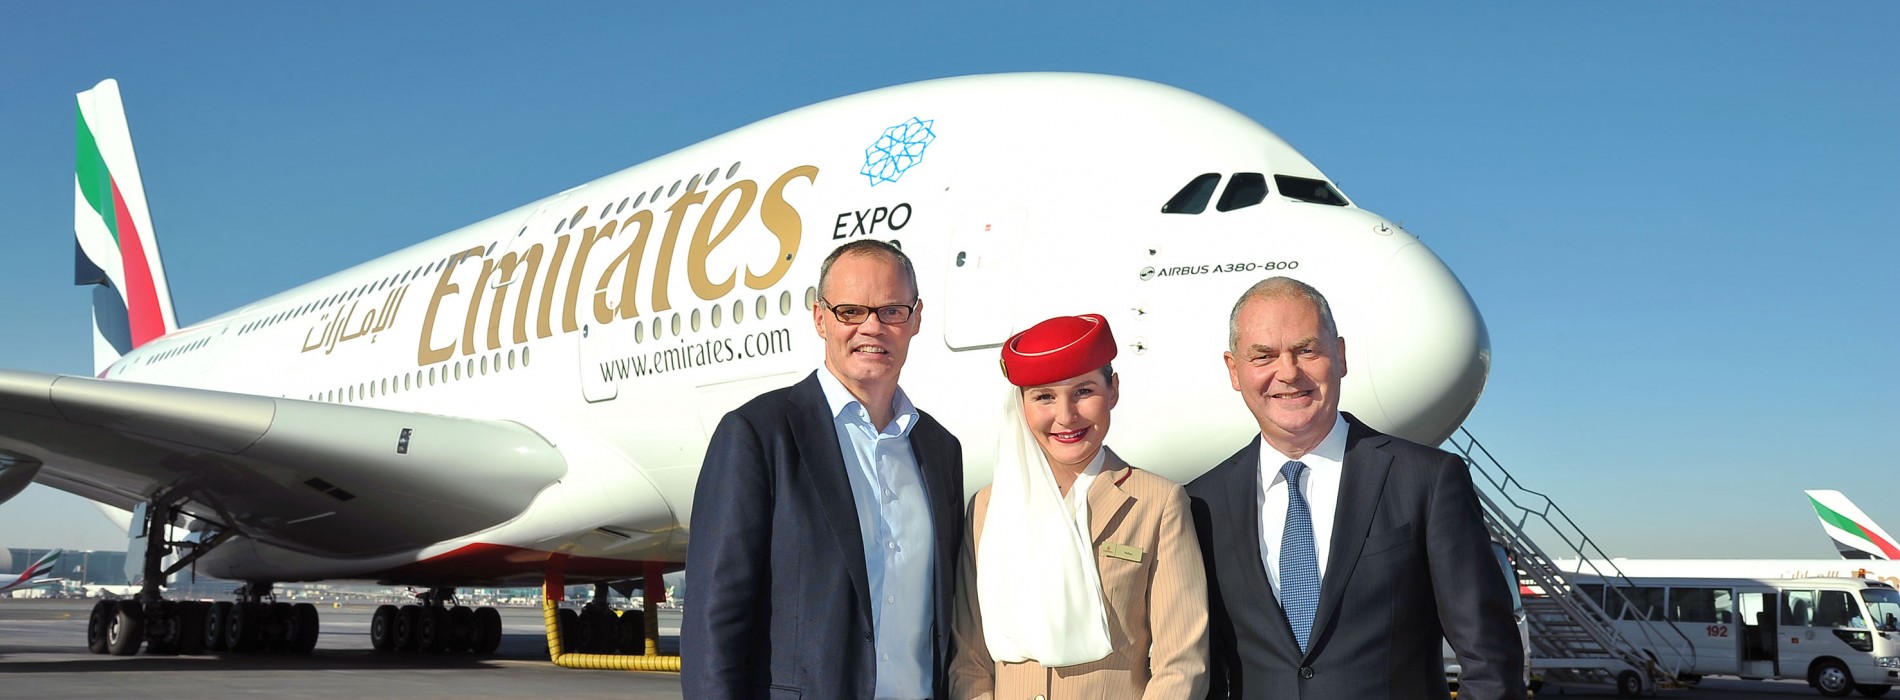 Starwood Preferred Guest & Emirates Skywards join forces to extend benefits across the sky & around the globe